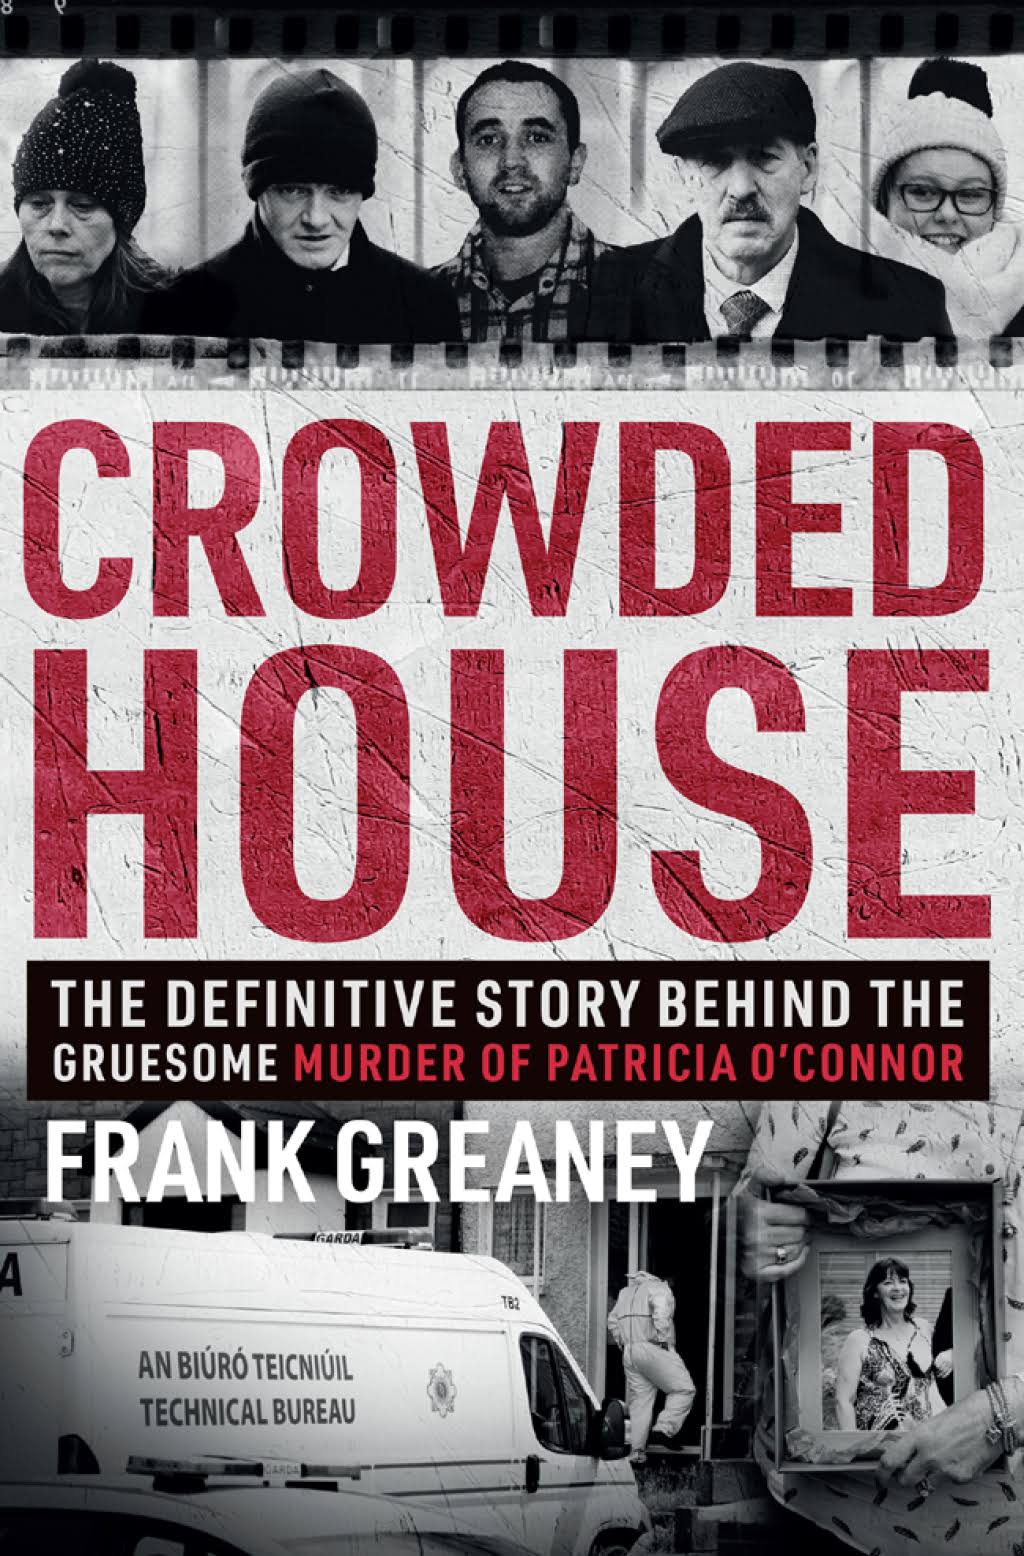 Crowded House: The Definitive Story Behind the Gruesome Murder of Patricia O'Connor [Book]